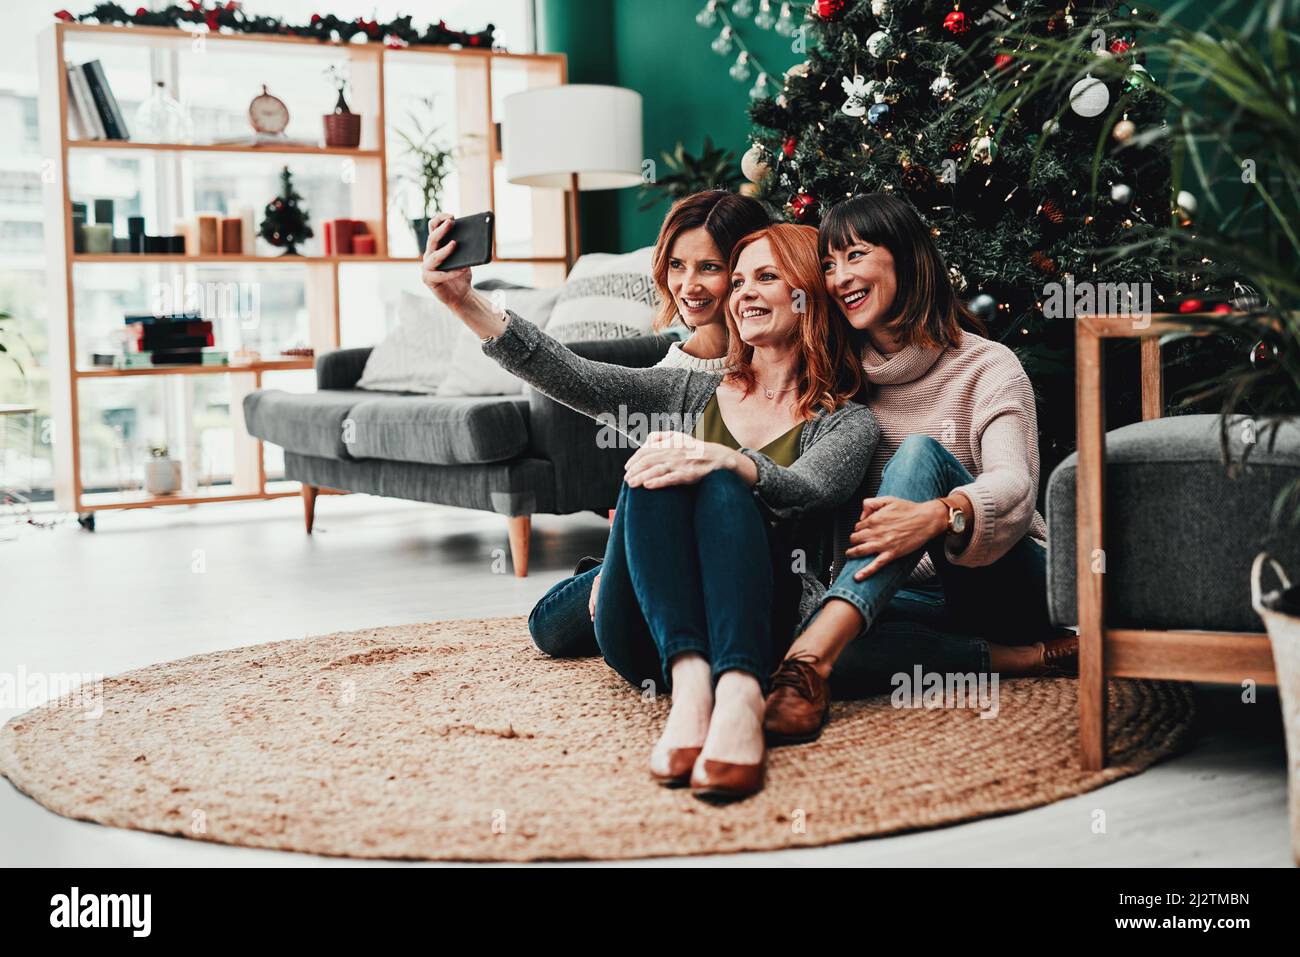 Time for a selfie together. Shot of three attractive middle aged women taking self portraits together with a cellphone at home during Christmas time. Stock Photo